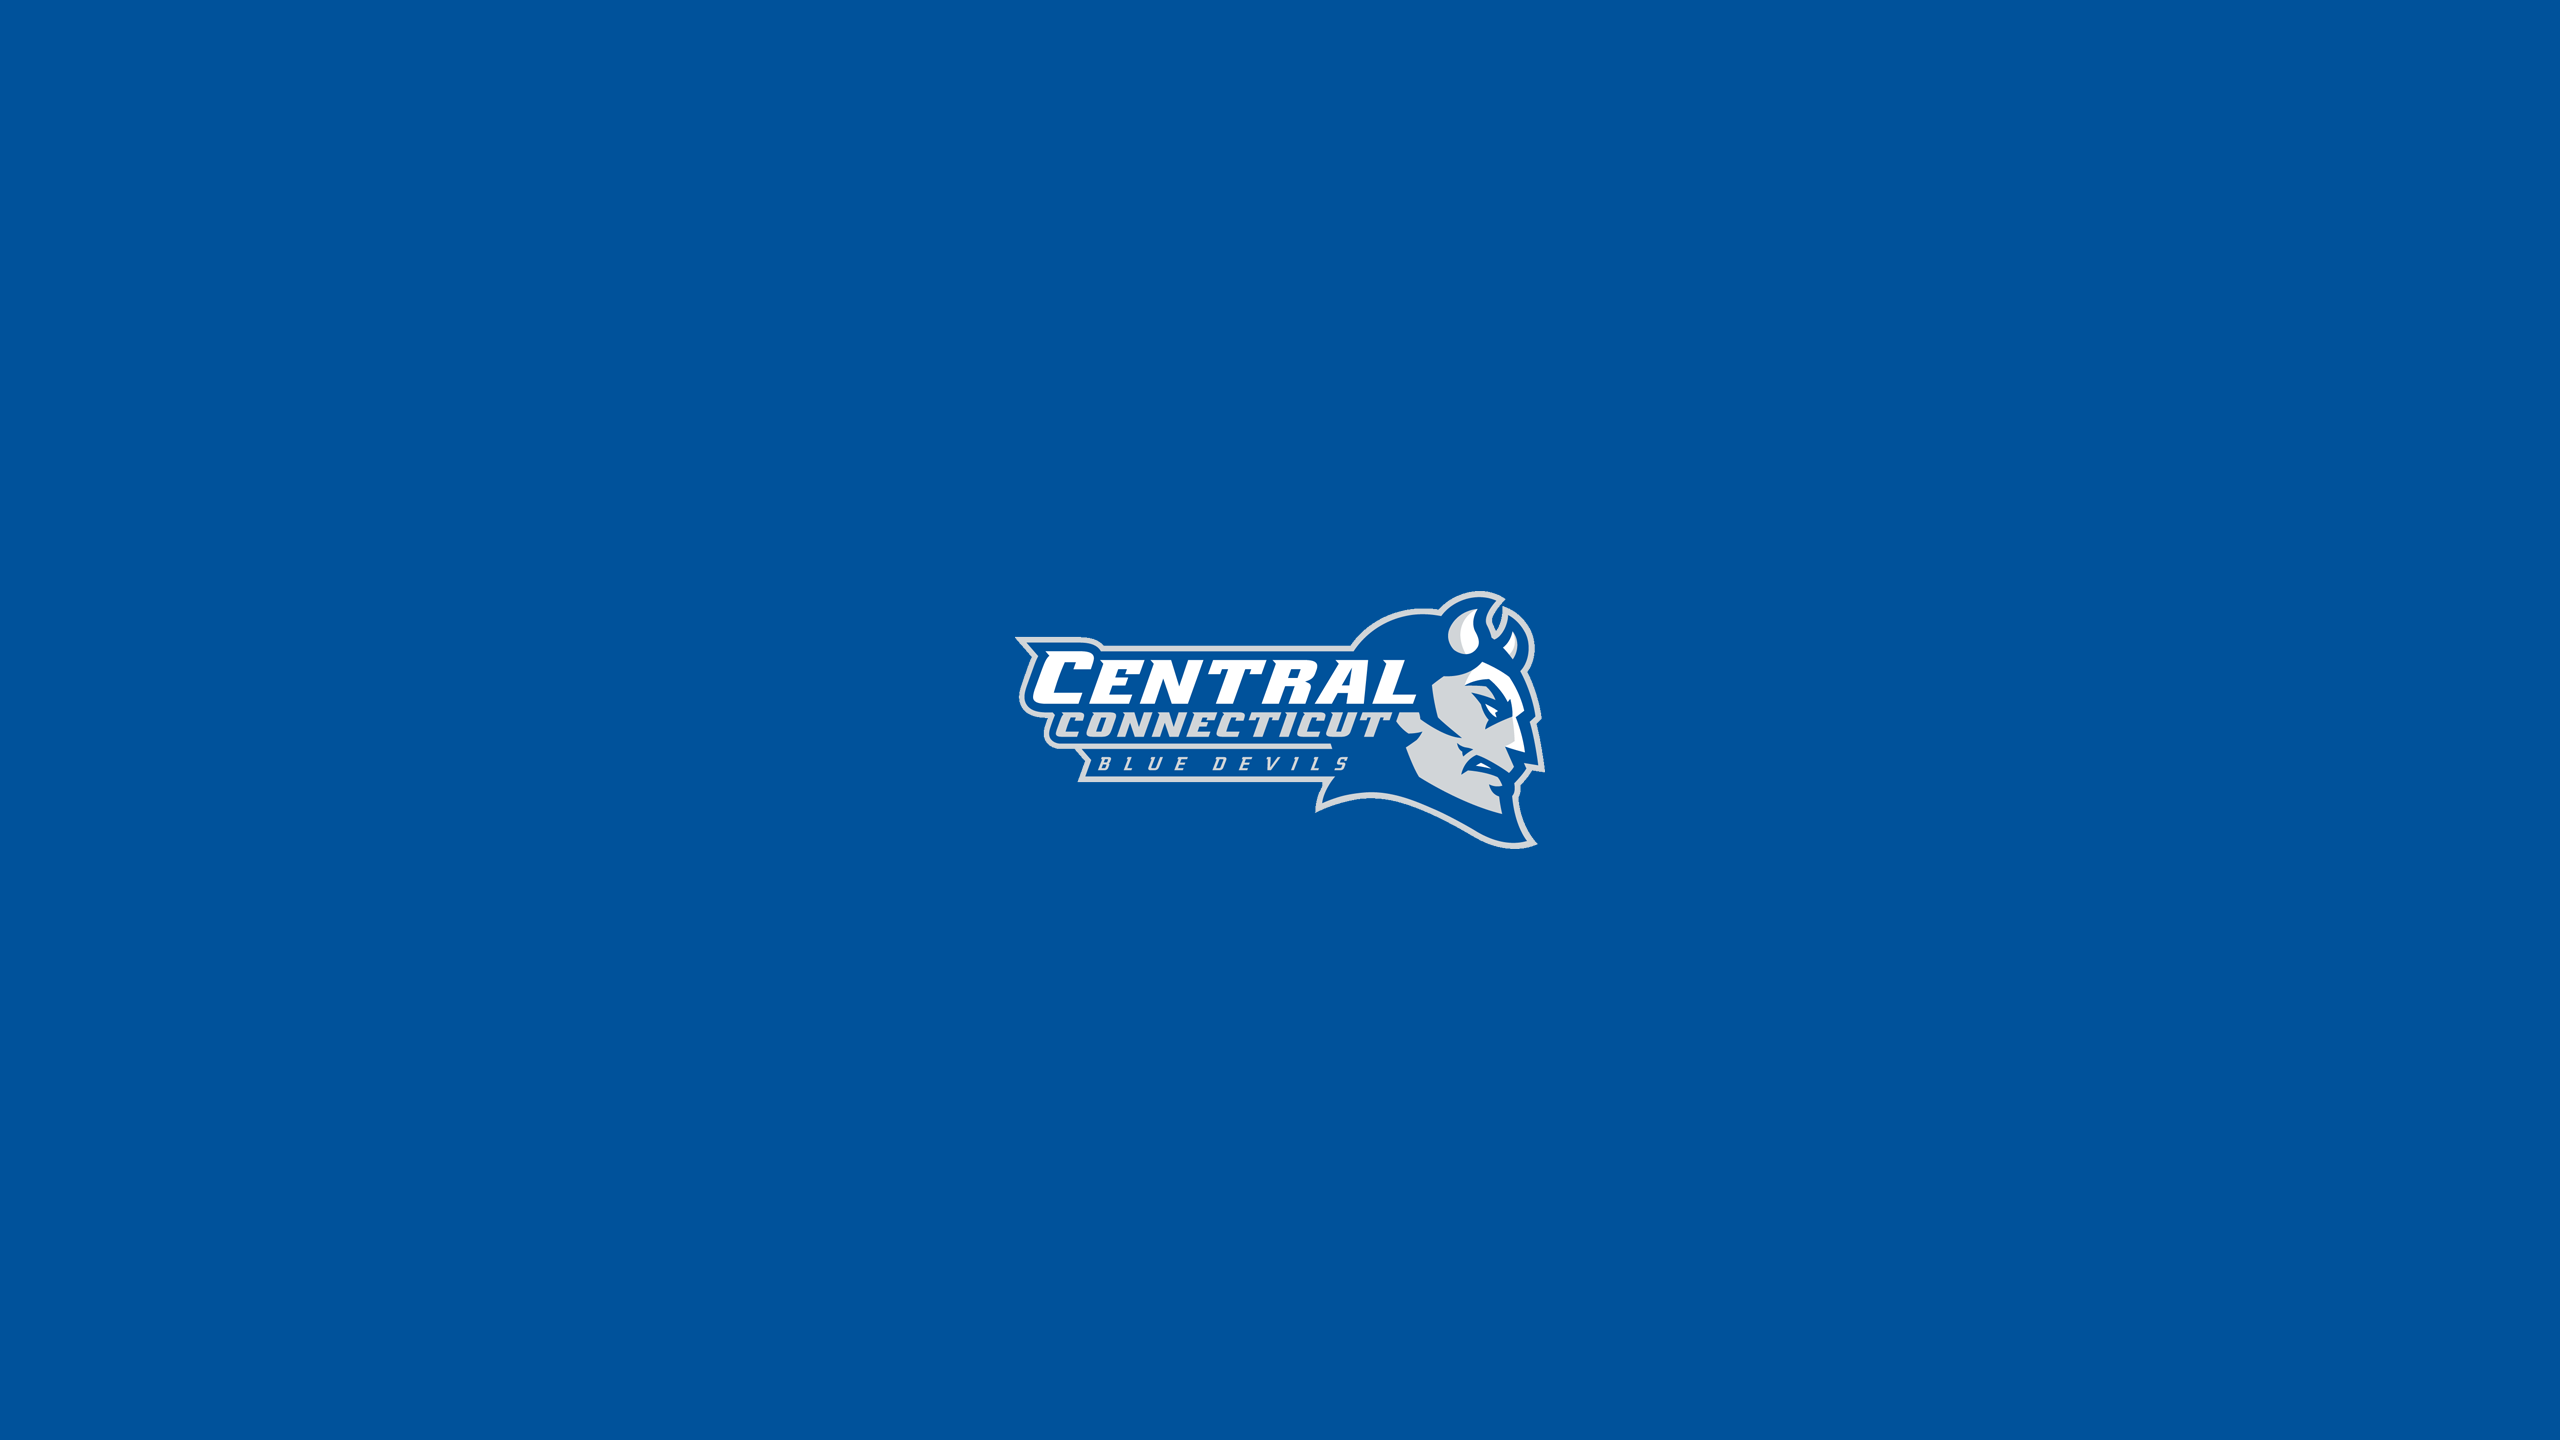 Central Connecticut Blue Devils Basketball - NCAAB - Square Bettor